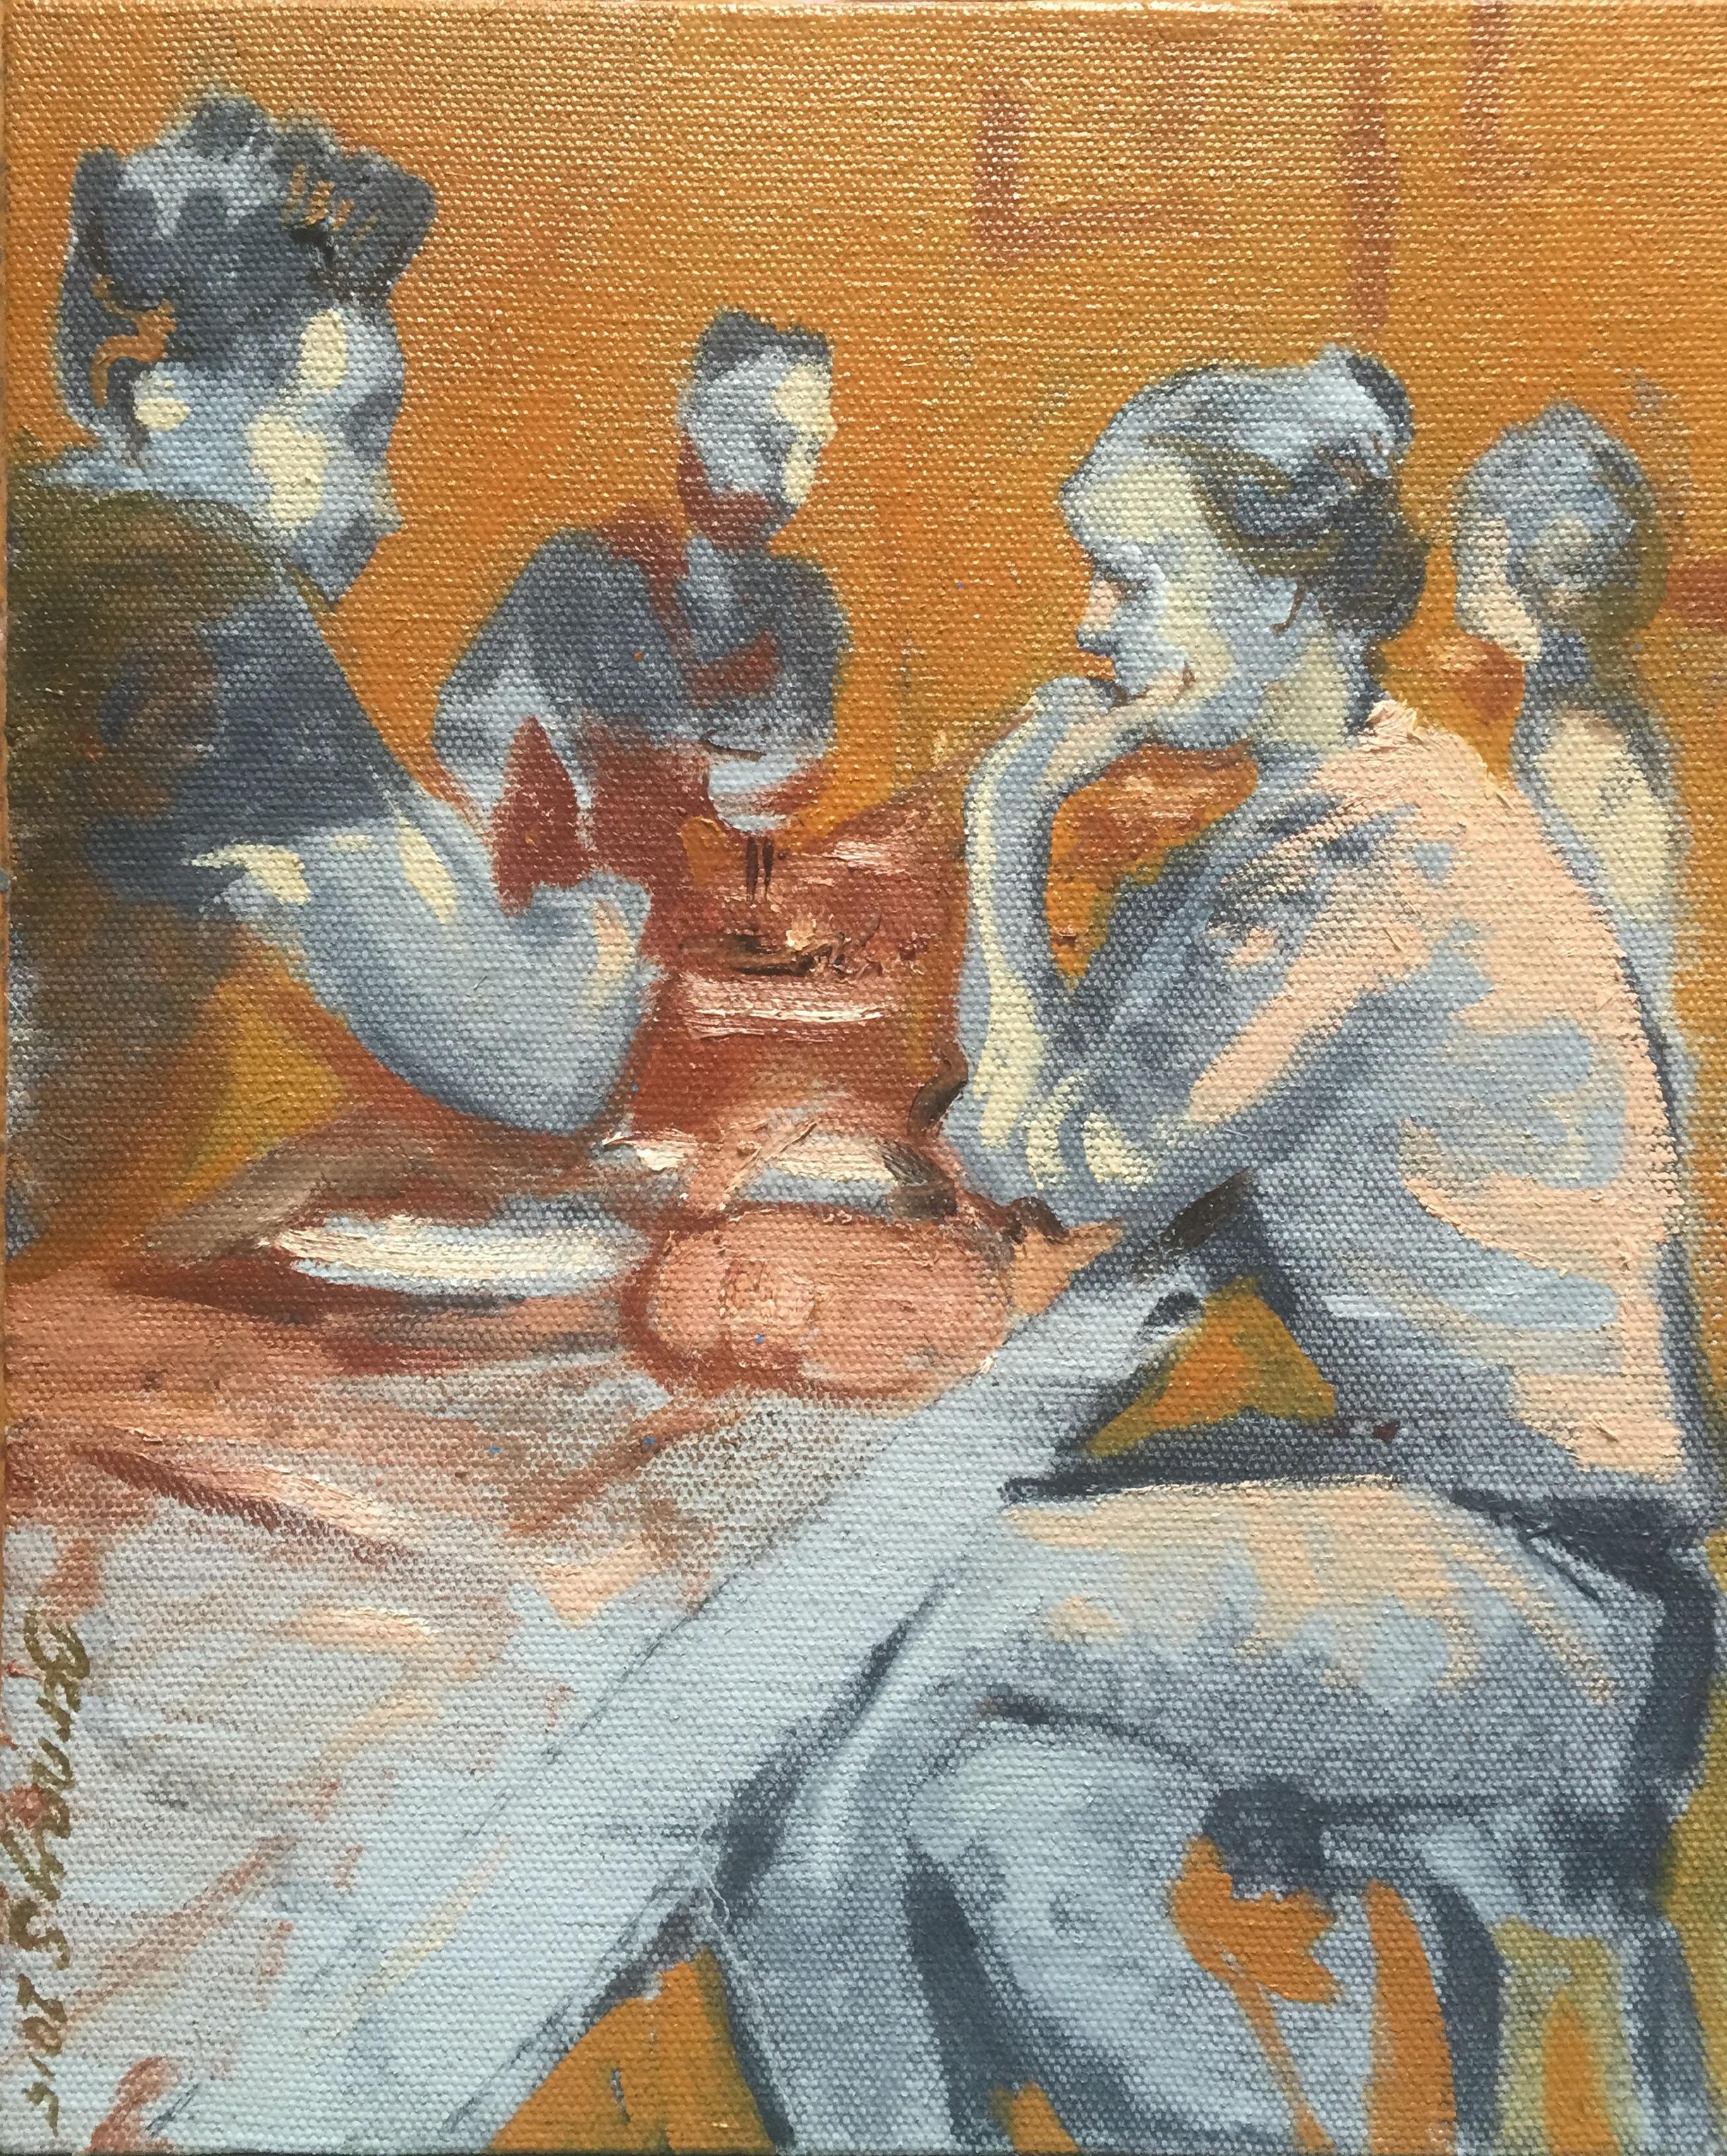 This is a pair for the Blue Date. A slightly larger painting of another scene of a girl on a date. In this one, there is the dubious conviction and storytelling of this interpersonal dance. The lives of young people are filled with others, the